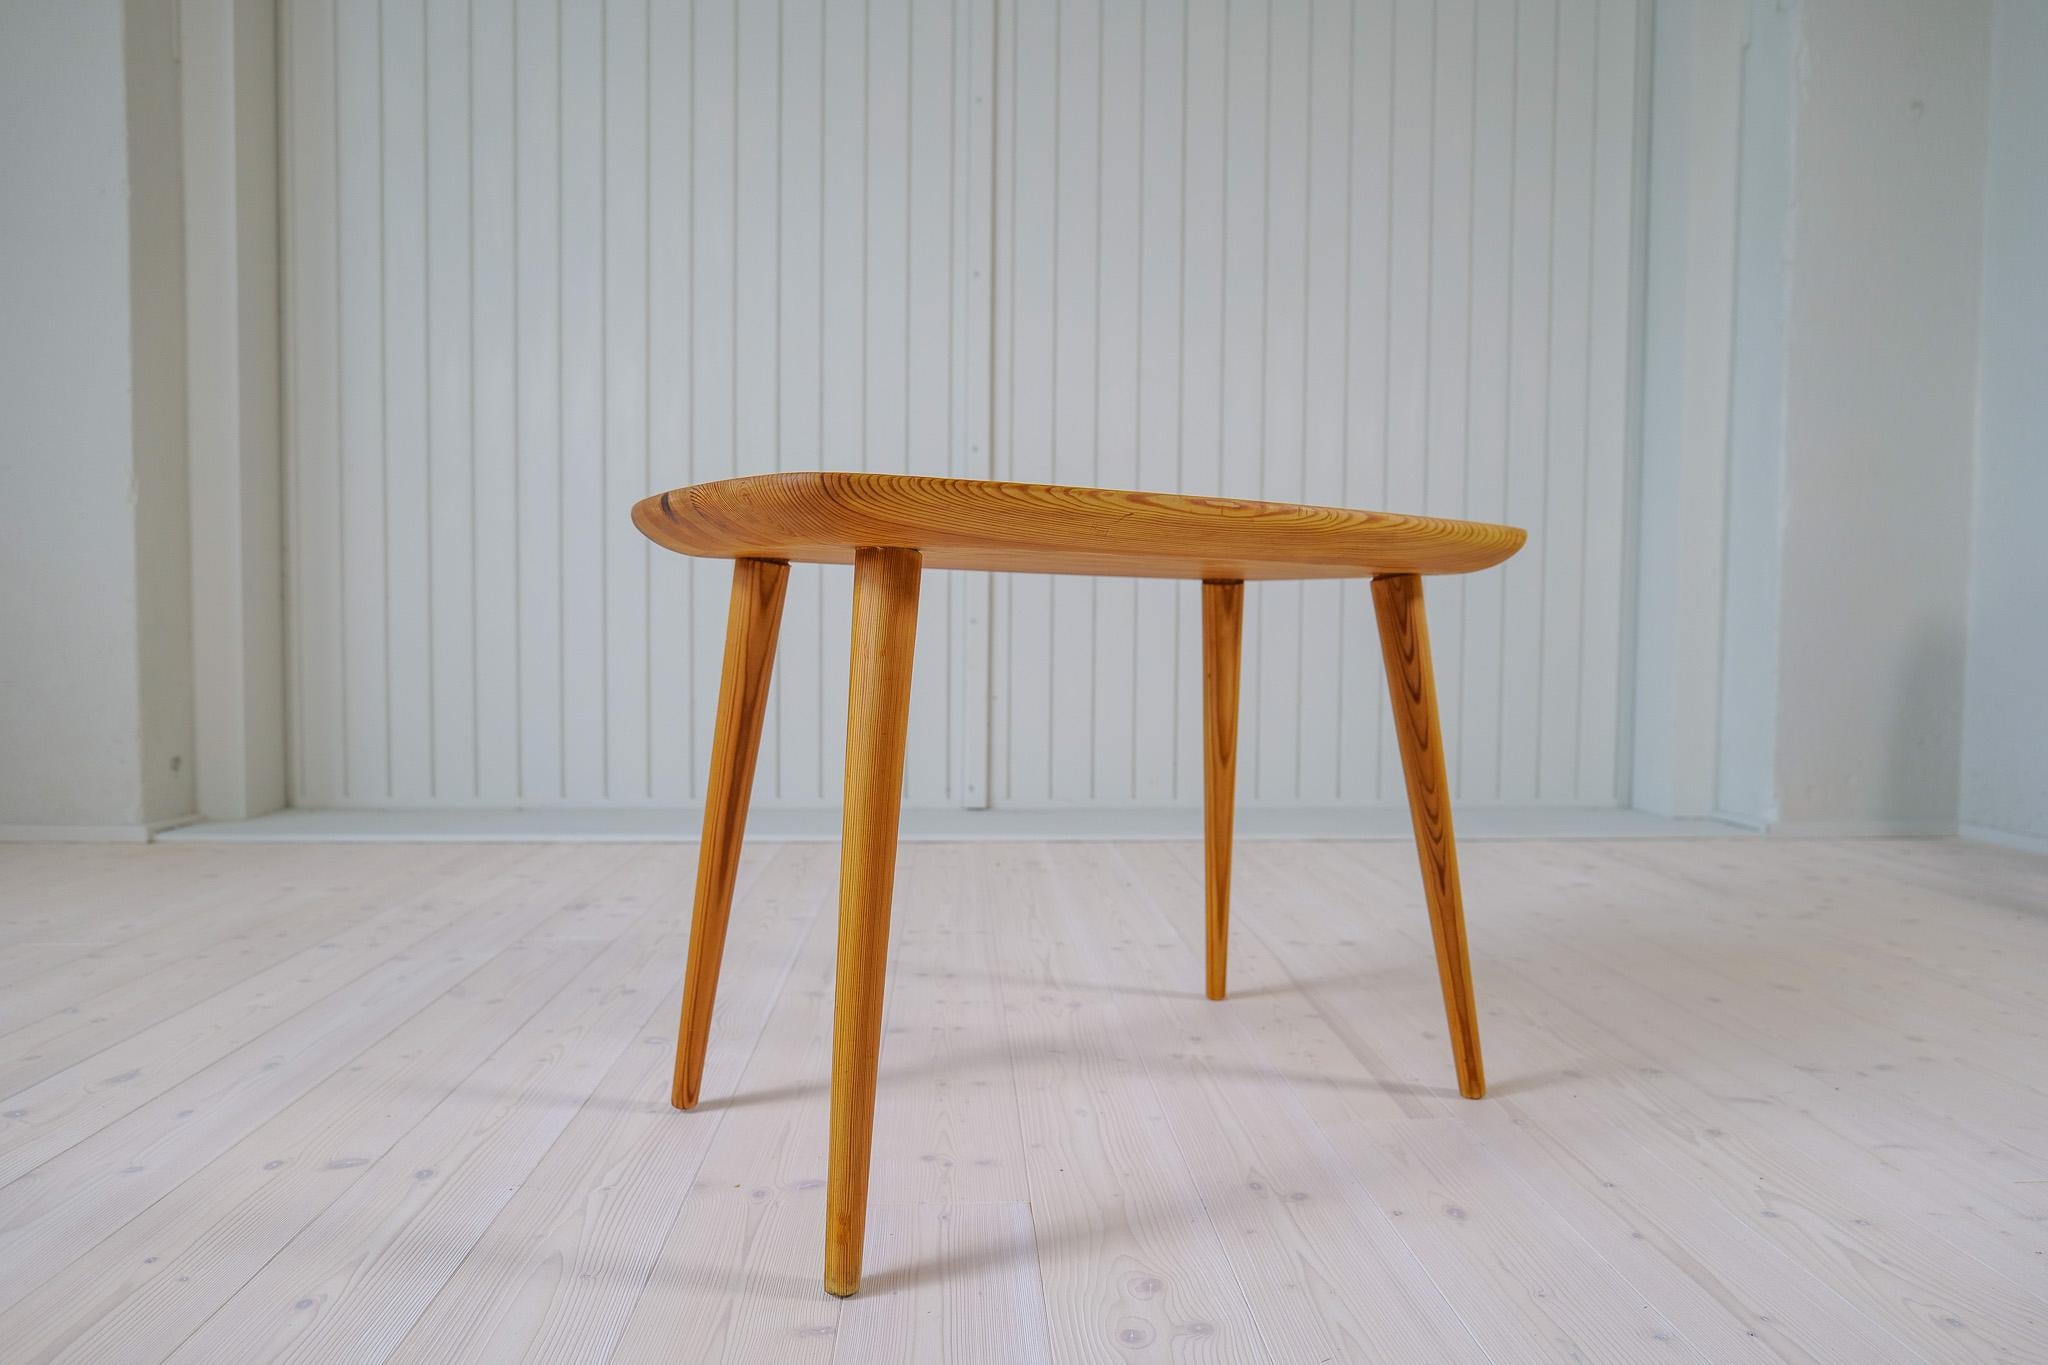 Swedish Midcentury Modern Coffe Table in Pine Sweden 1940s For Sale